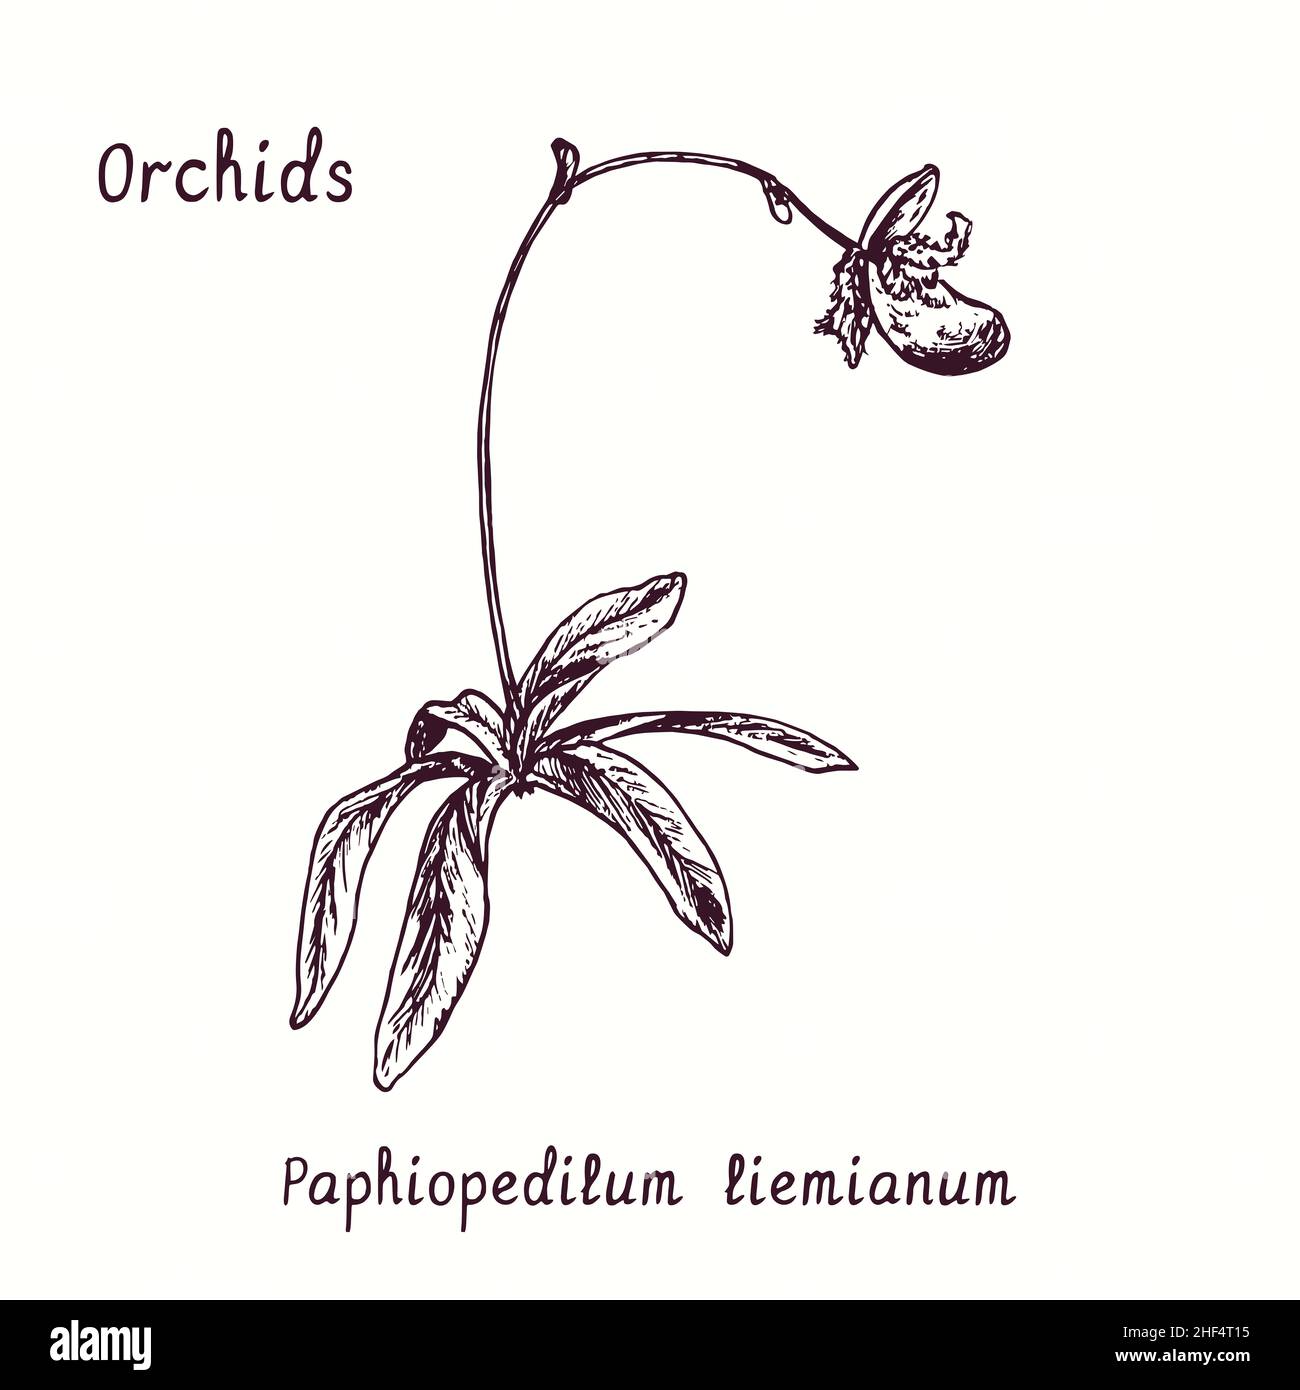 Paphiopedilum liemianum orchids flower collection. Ink black and white doodle drawing in woodcut style with inscription. Stock Photo